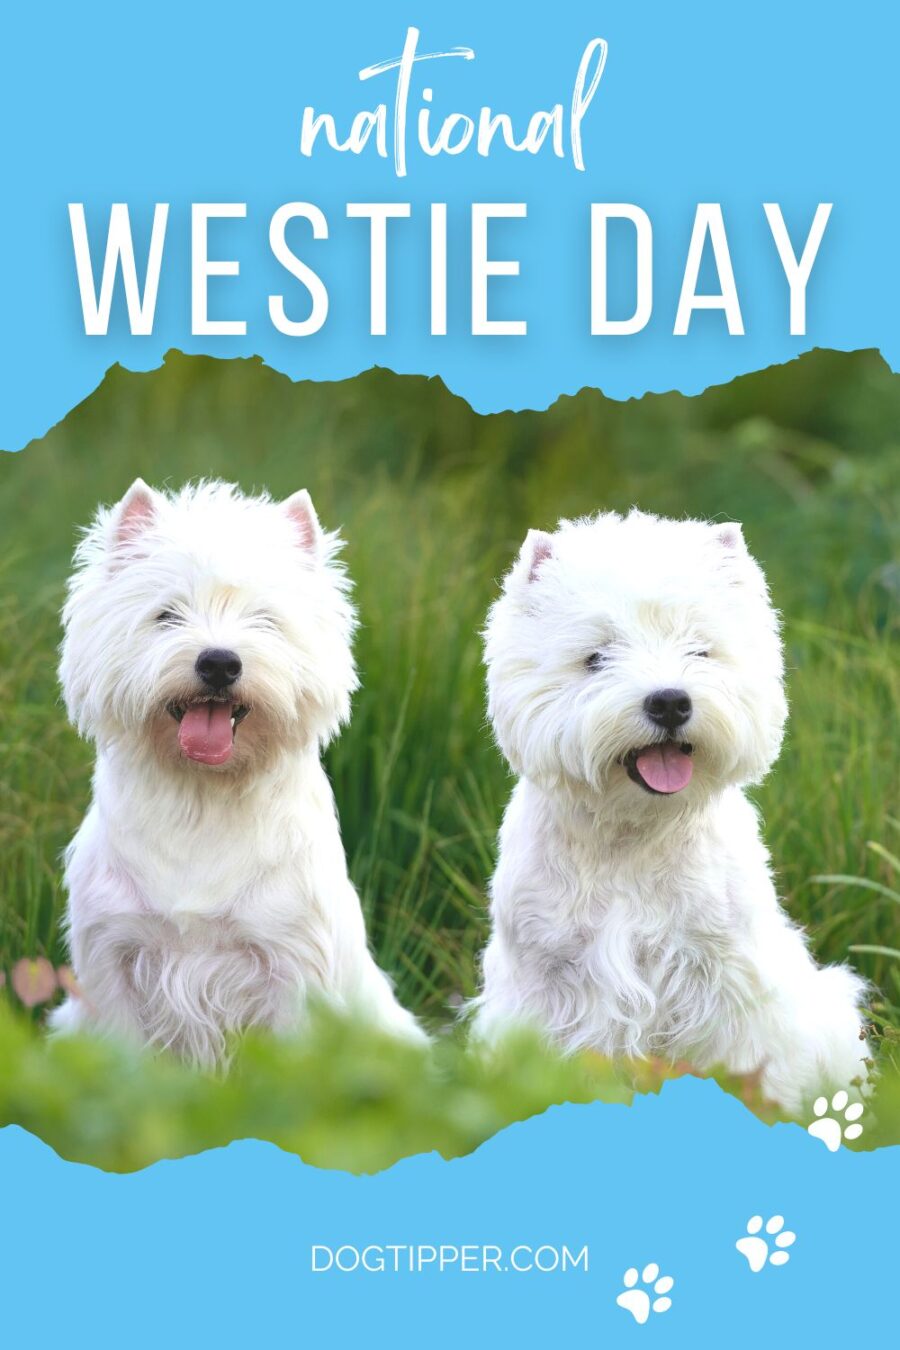 National Westie Day, annual pet holiday honoring the West Highland White Terrier